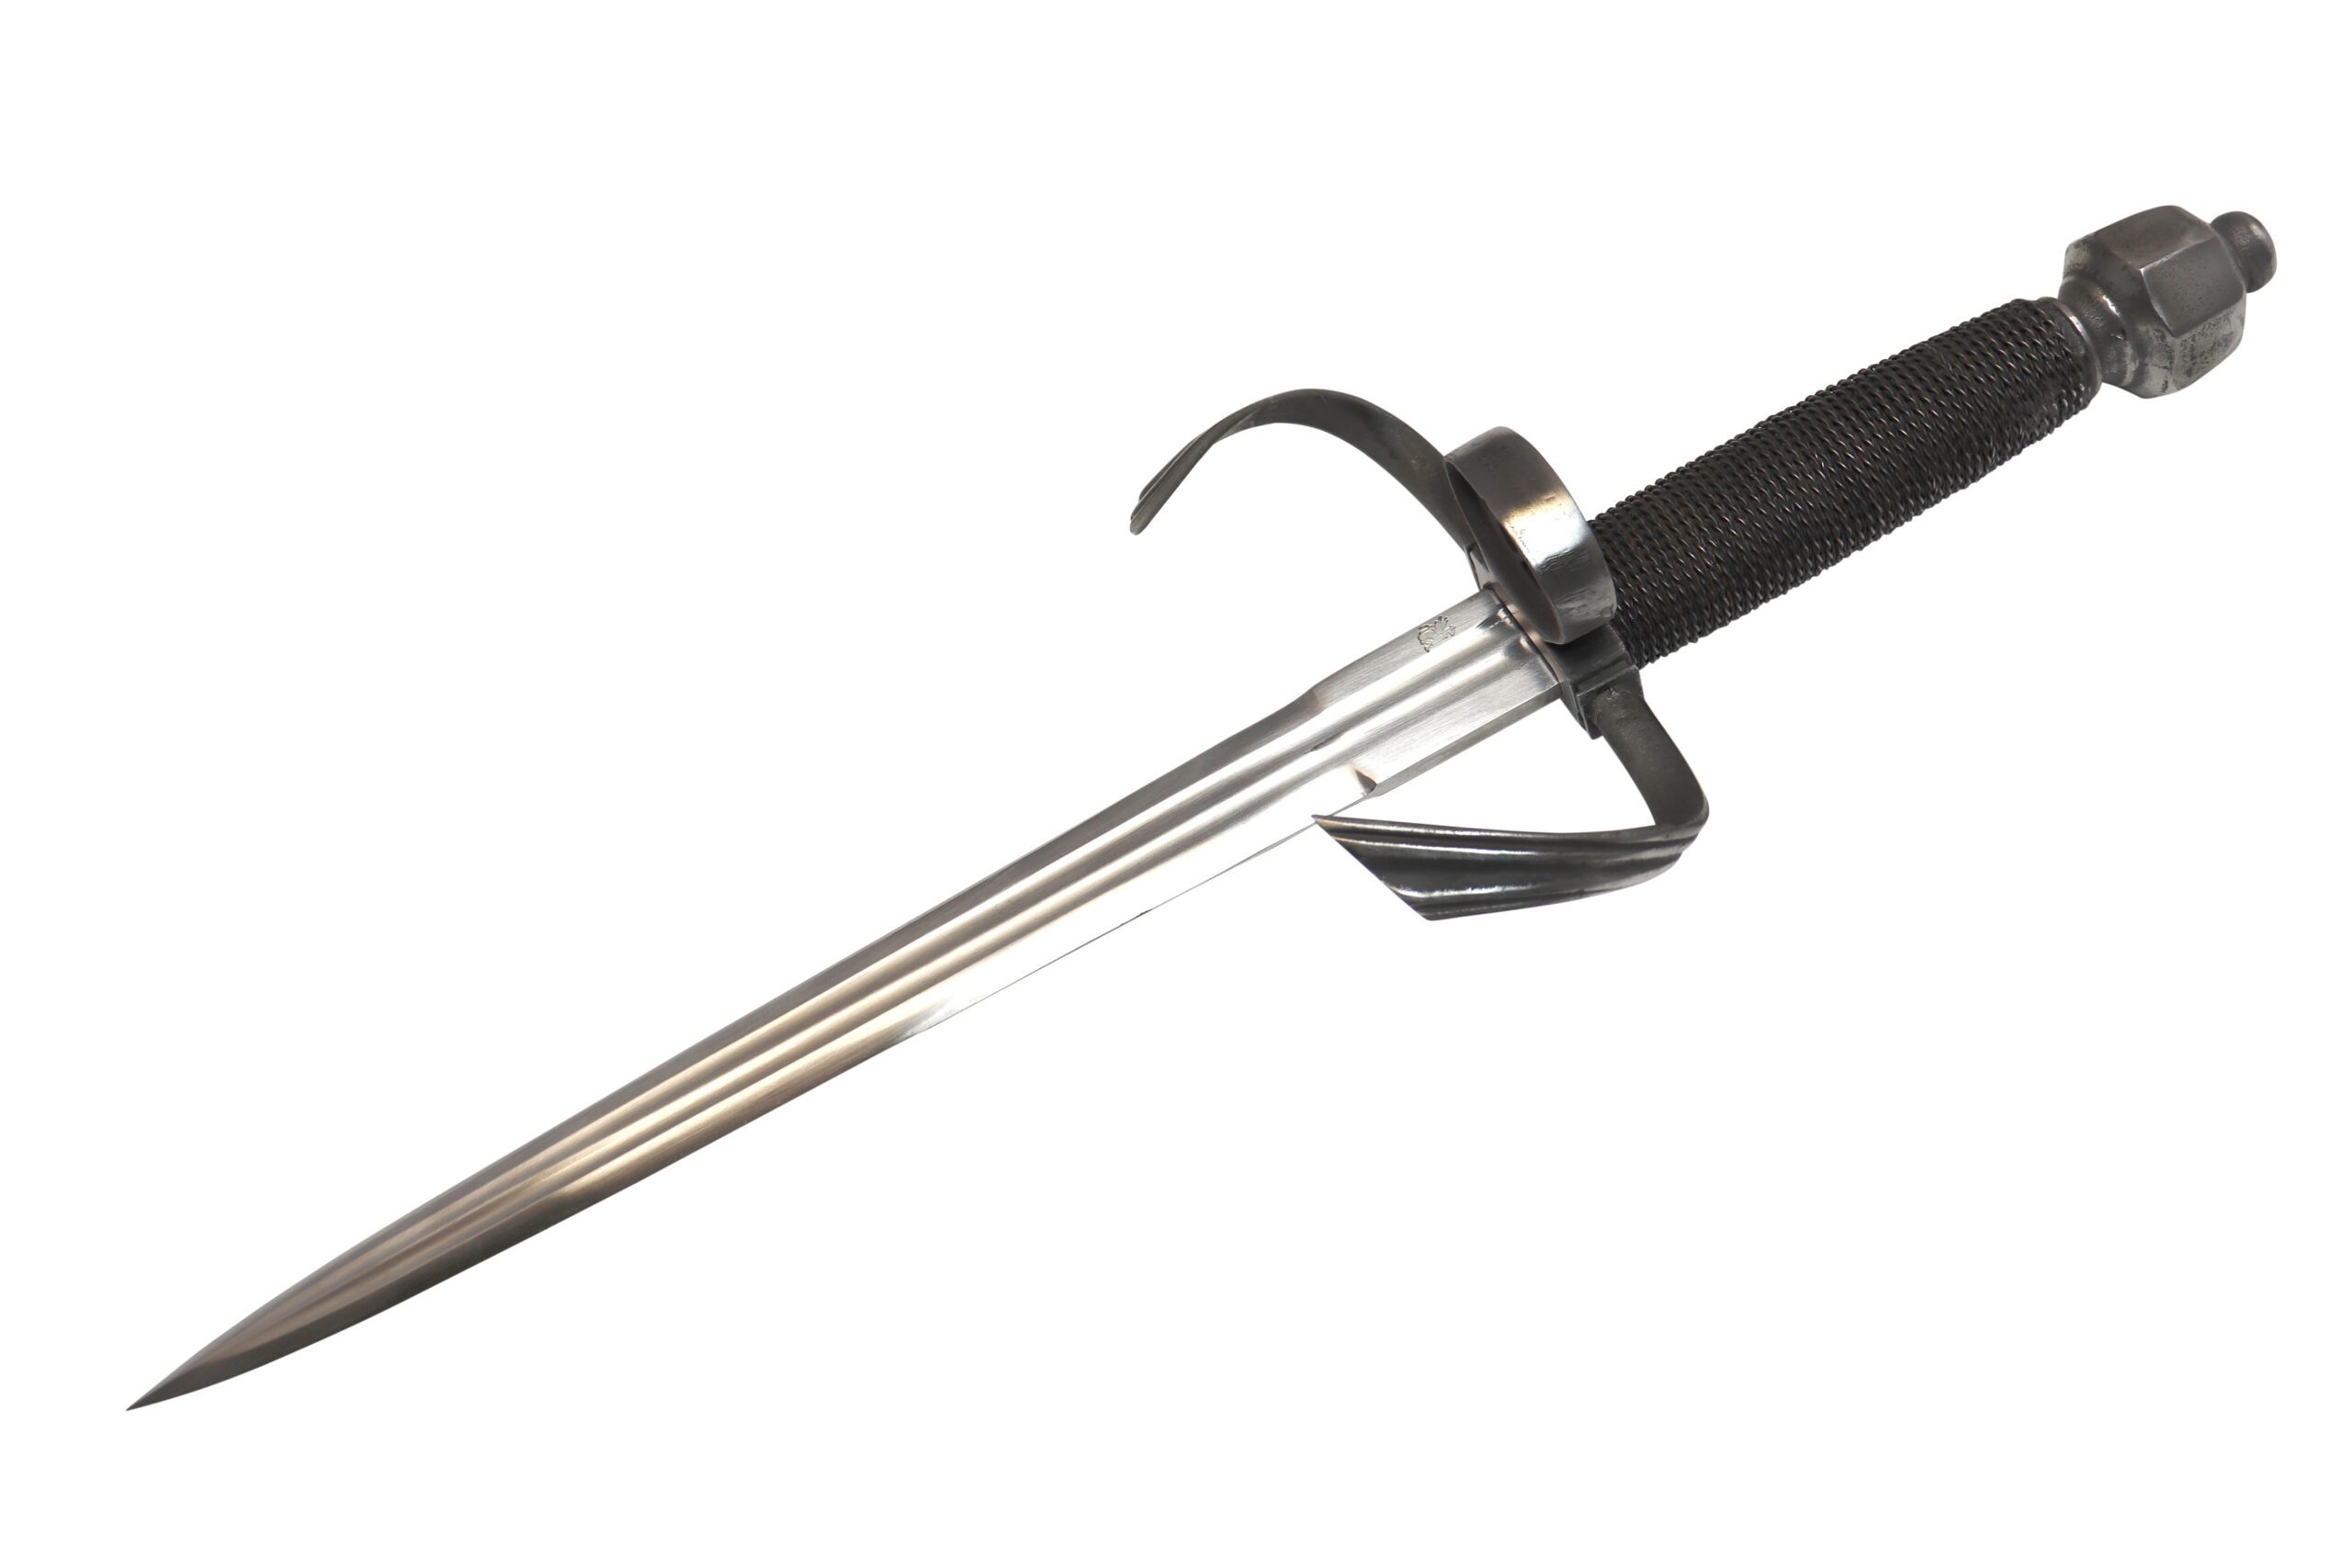 https://www.darksword-armory.com/wp-content/uploads/2023/03/1823-Parrying-dagger-1-scaled.jpg